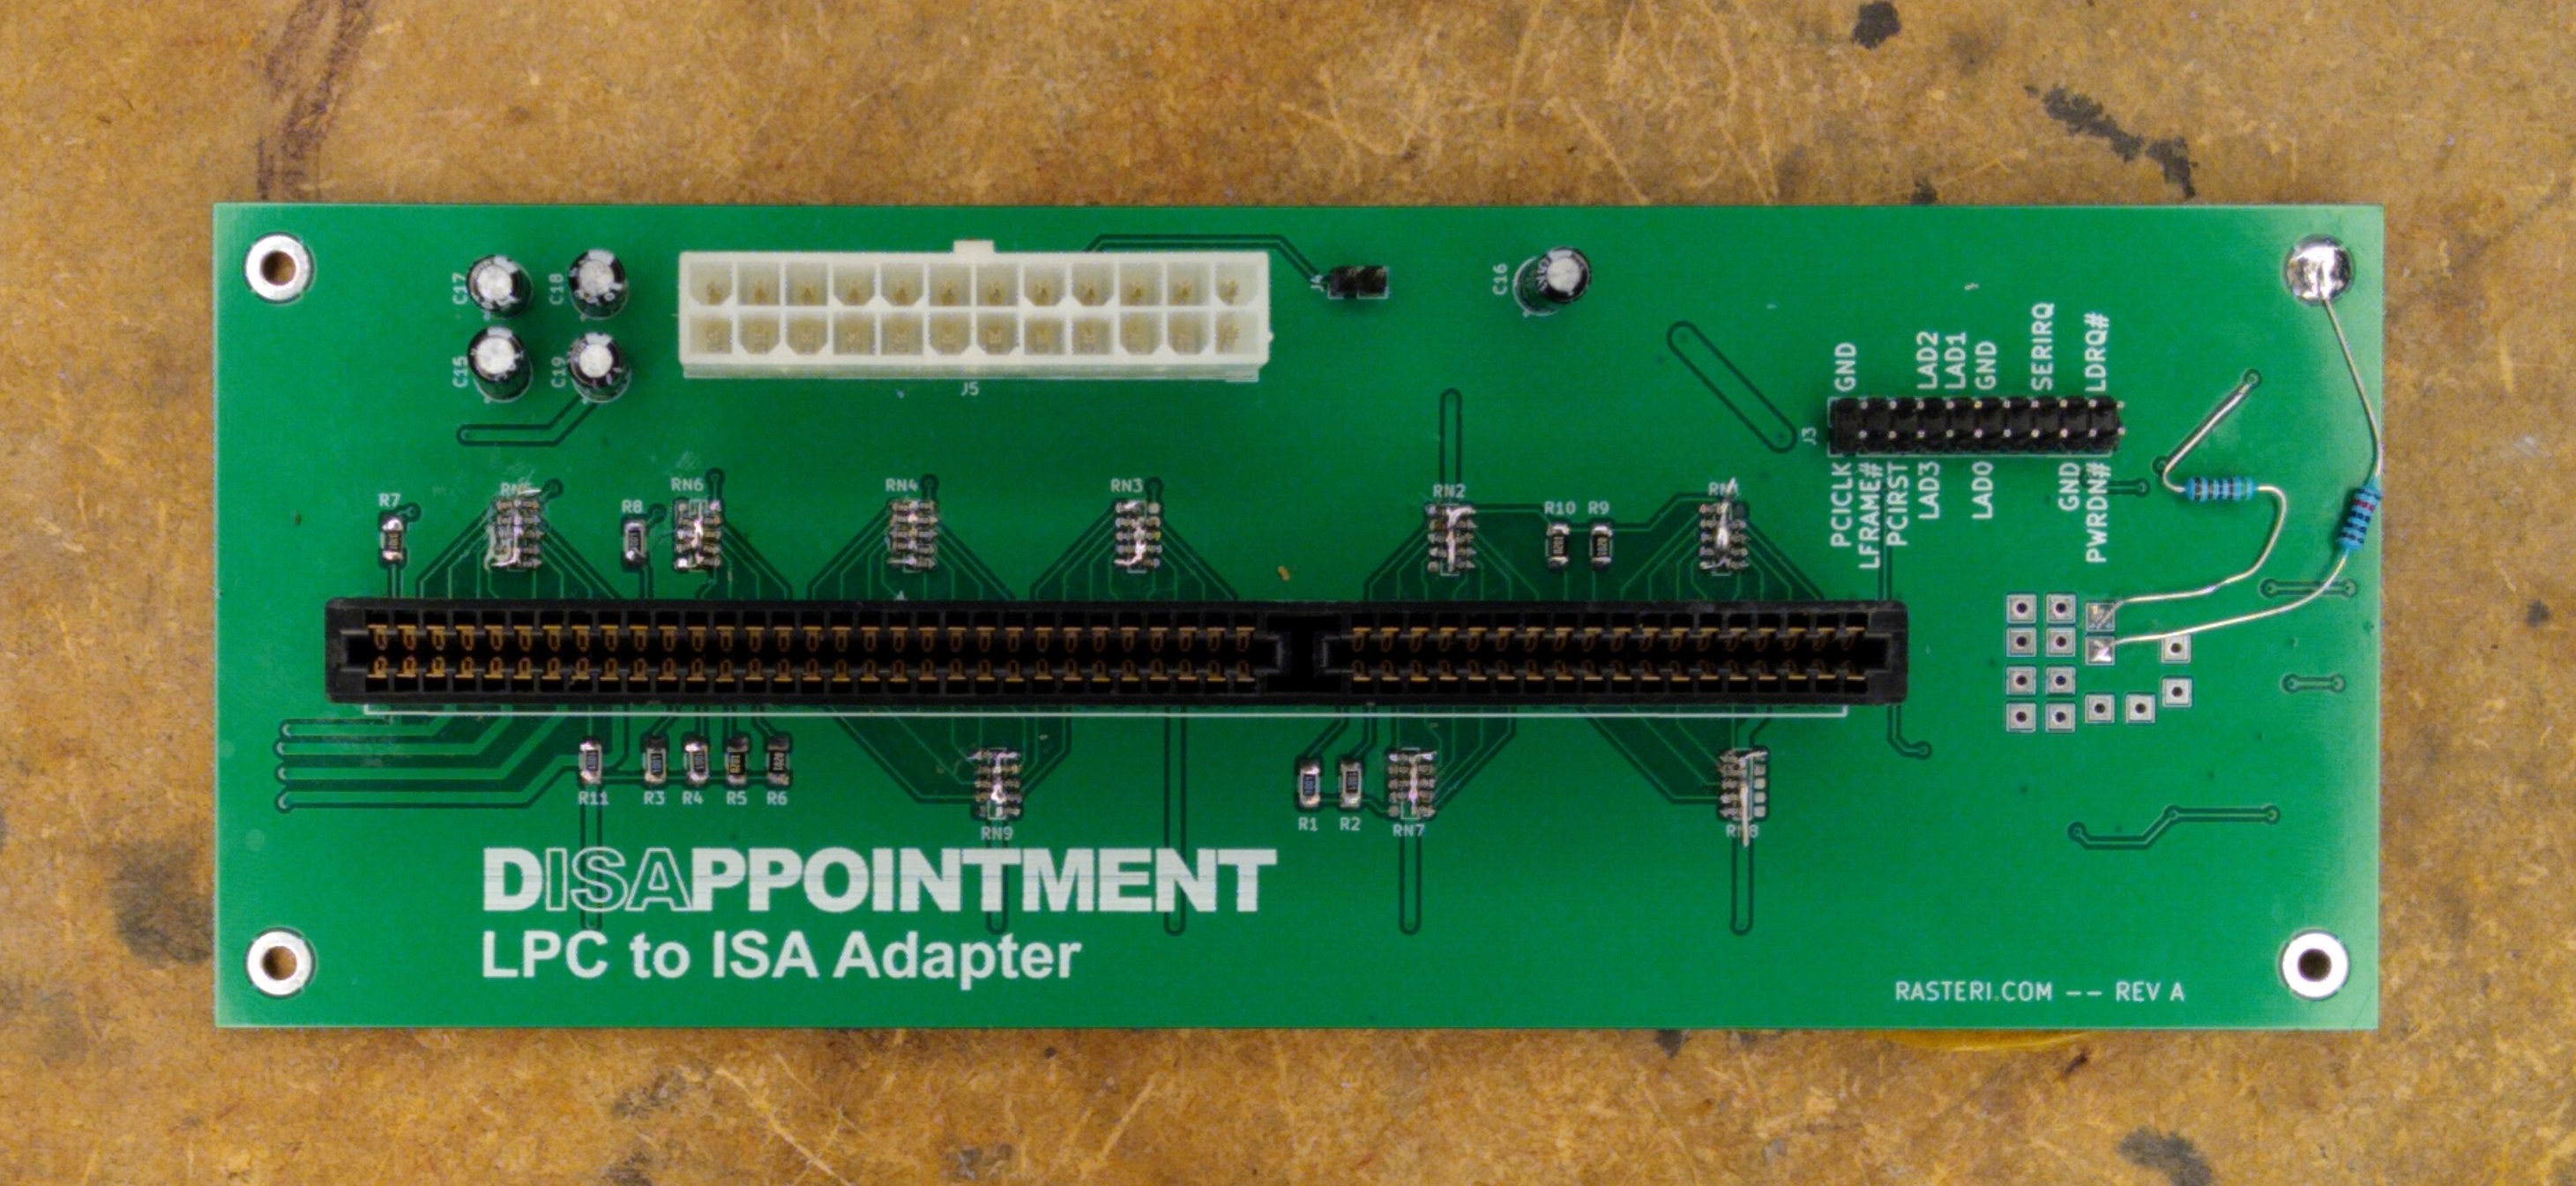 A green PCB with an ISA card slot and various connectors and components. The text "DISAPPOINTMENT LPC to ISA Adapter" is printed in the bottom left of the board.